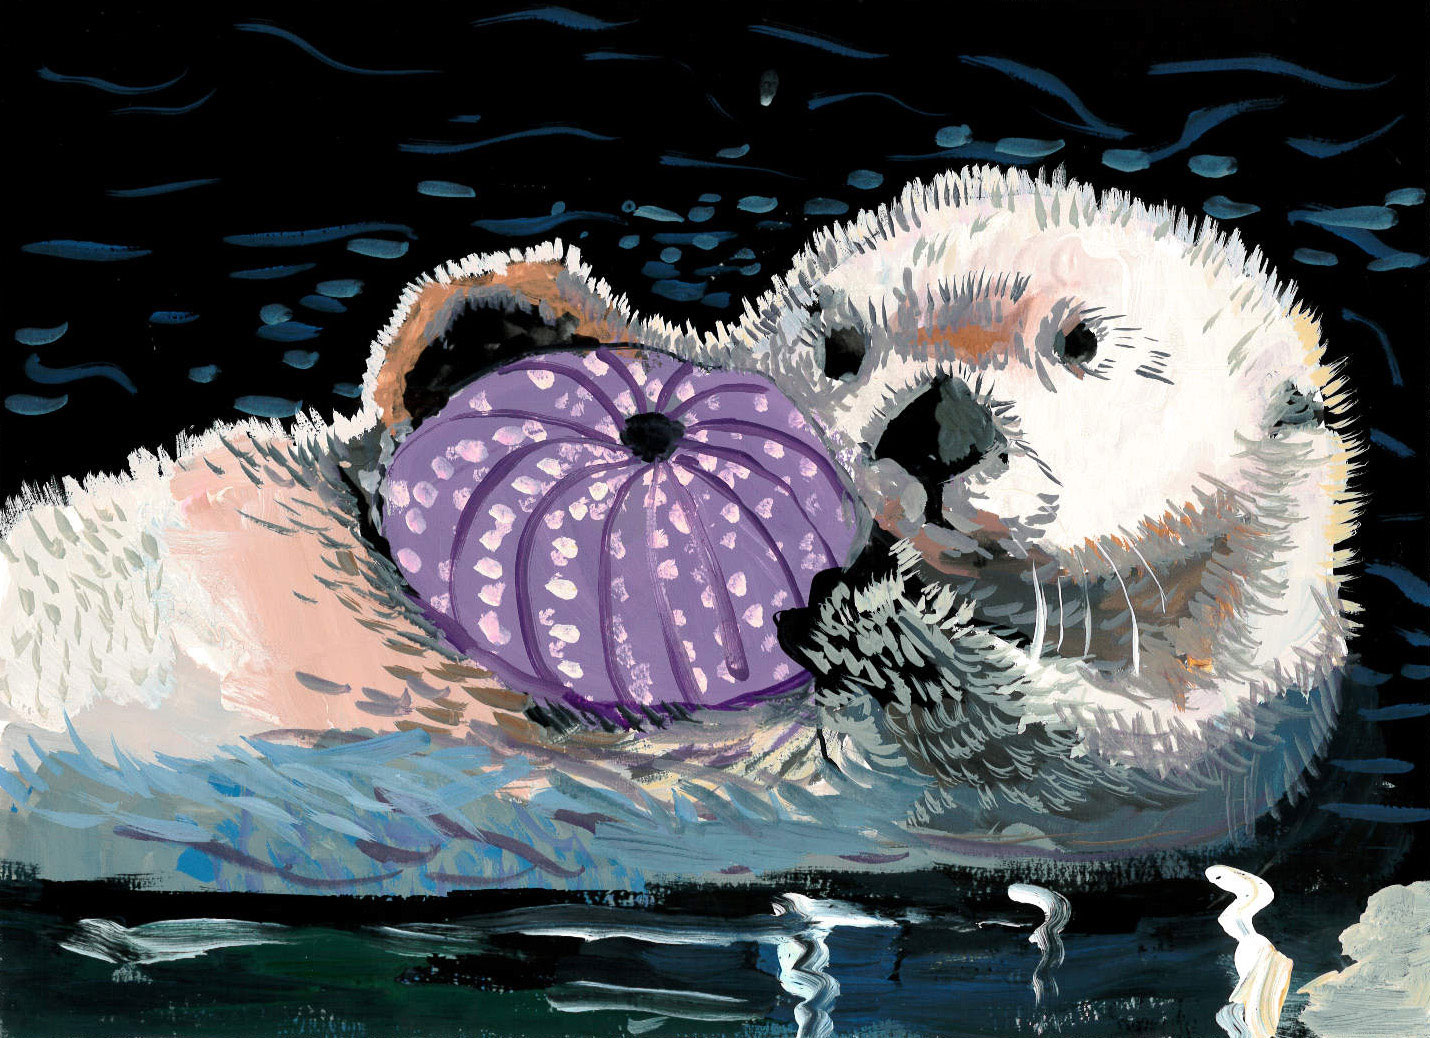 Painting of an otter holding an urchin